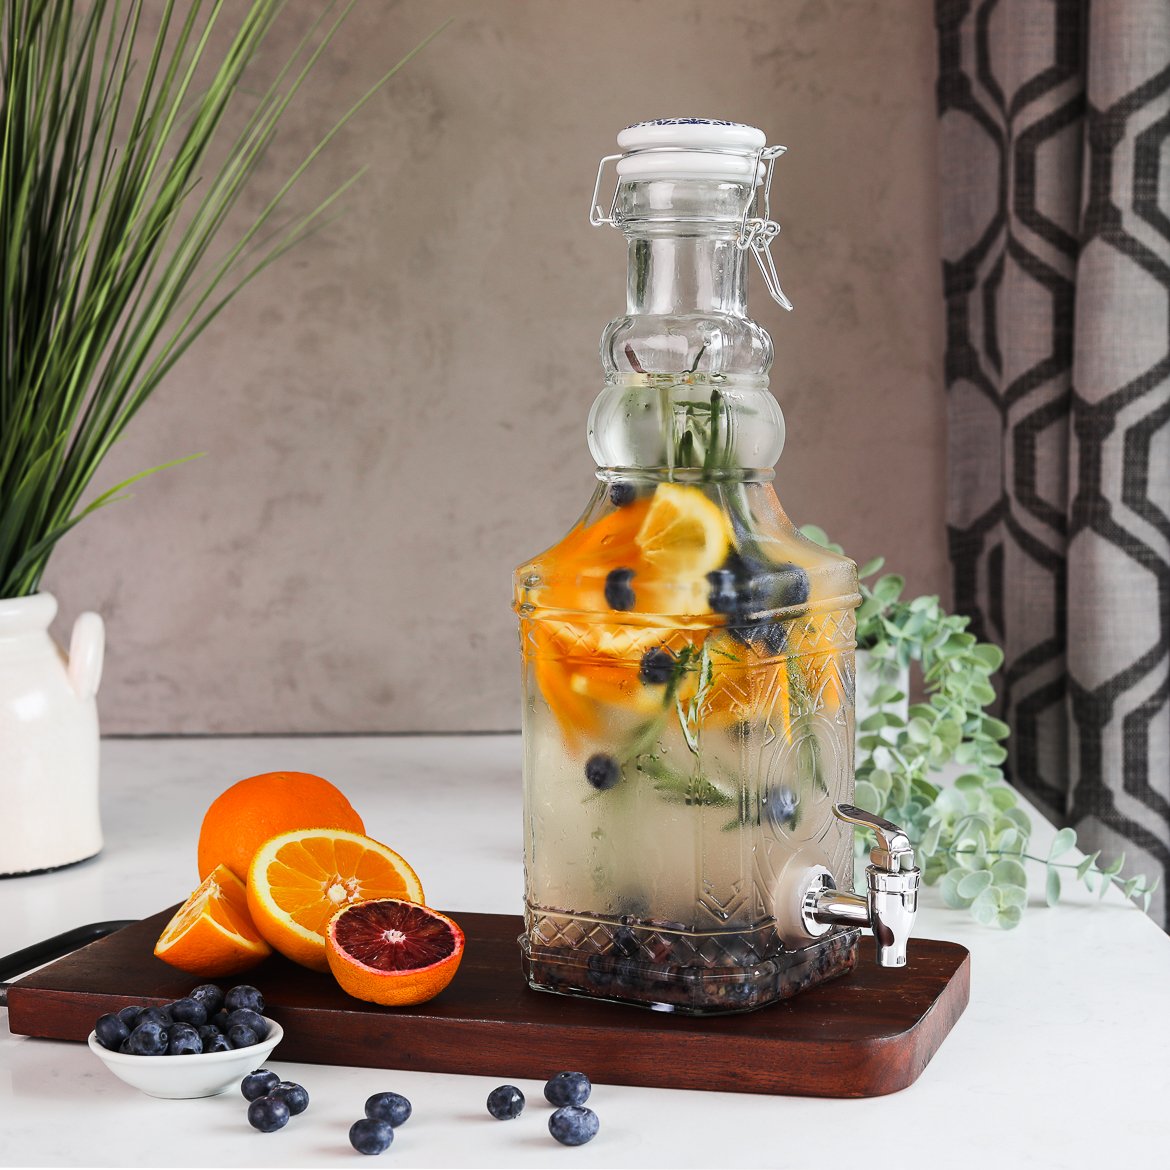 A pitcher containing a blueberry orange water infusion with springs of rosemary, displayed on a wooden board with fresh oranges and blueberries next to it